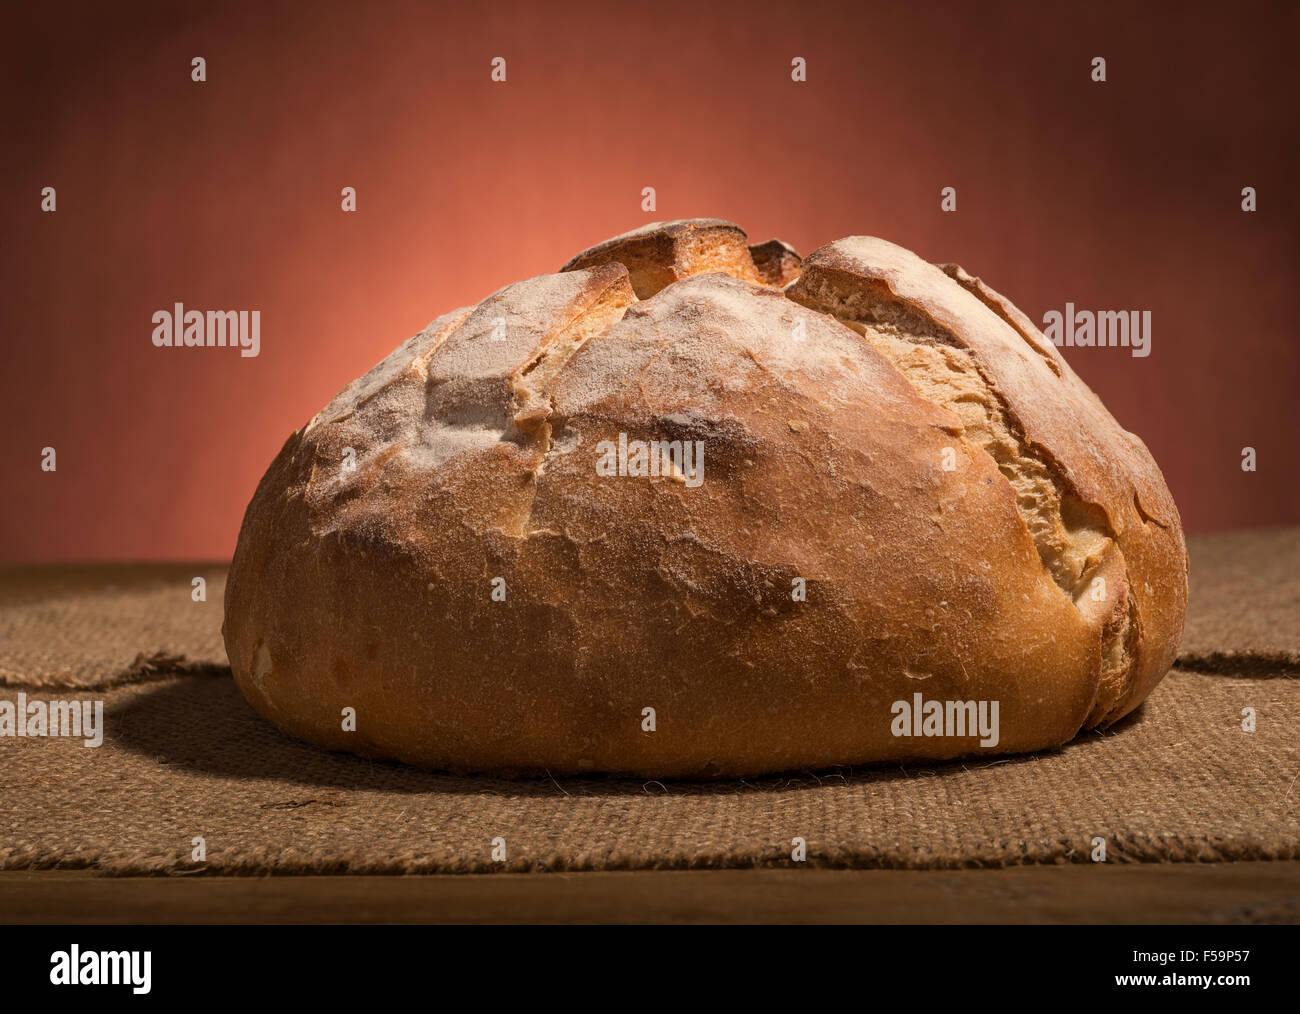 https://c8.alamy.com/comp/F59P57/loaf-of-fresh-homemade-sour-dough-bread-on-wooden-table-F59P57.jpg